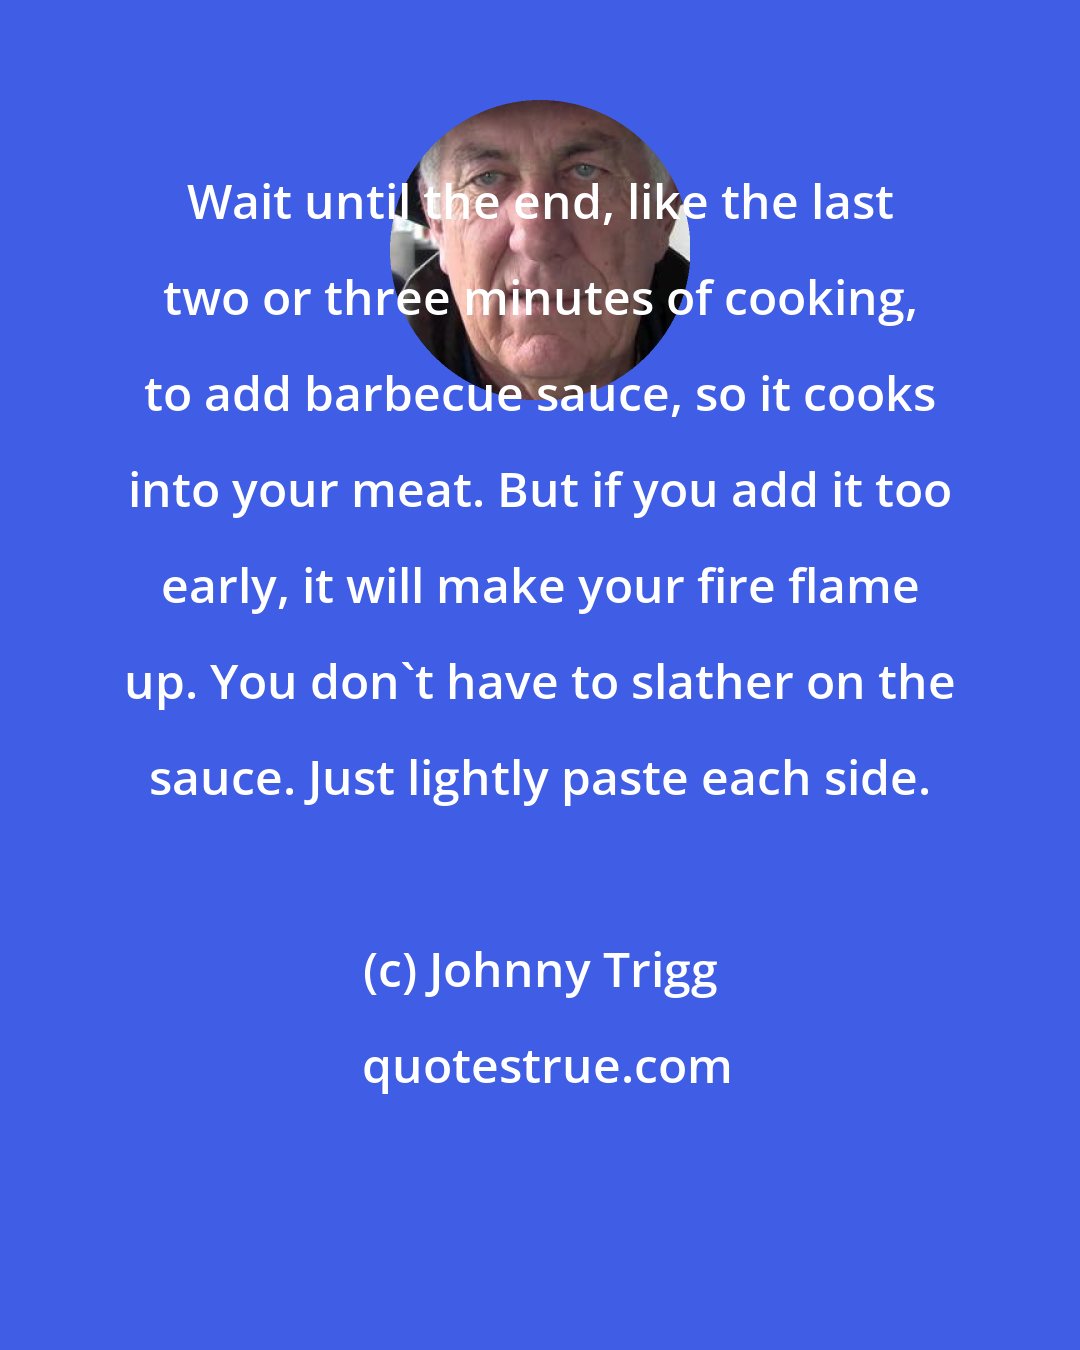 Johnny Trigg: Wait until the end, like the last two or three minutes of cooking, to add barbecue sauce, so it cooks into your meat. But if you add it too early, it will make your fire flame up. You don't have to slather on the sauce. Just lightly paste each side.